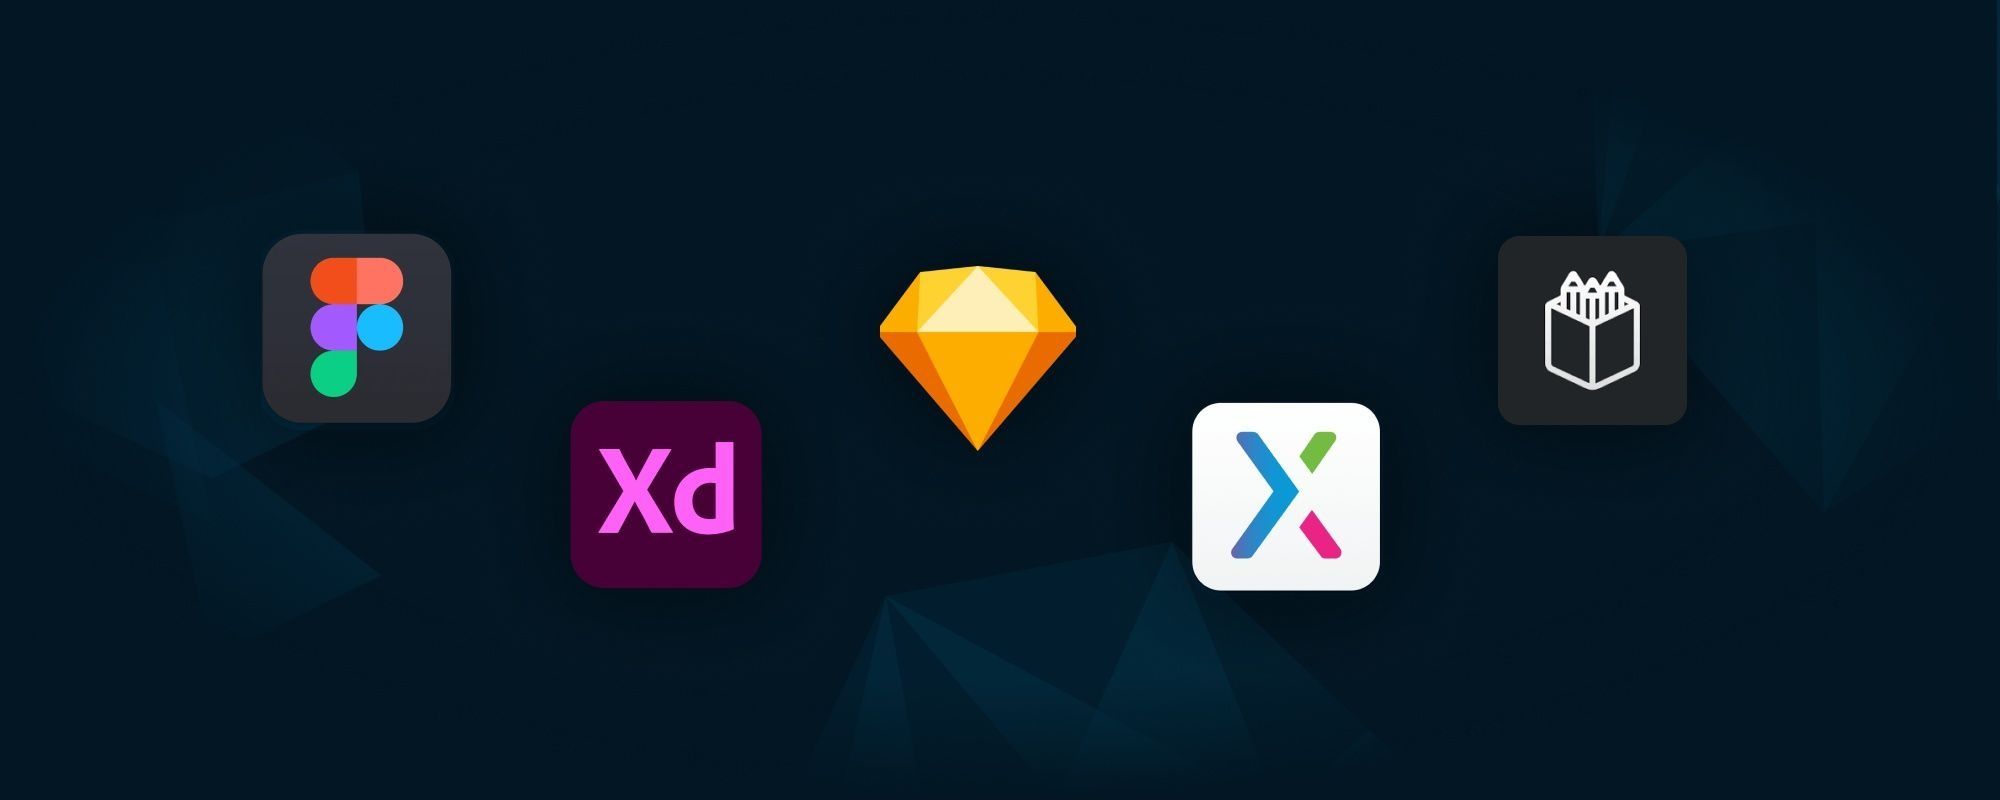 Collection of design tools logos as images on a dark background (from left: Figma, XD, Sketch, Axure, Penpot)